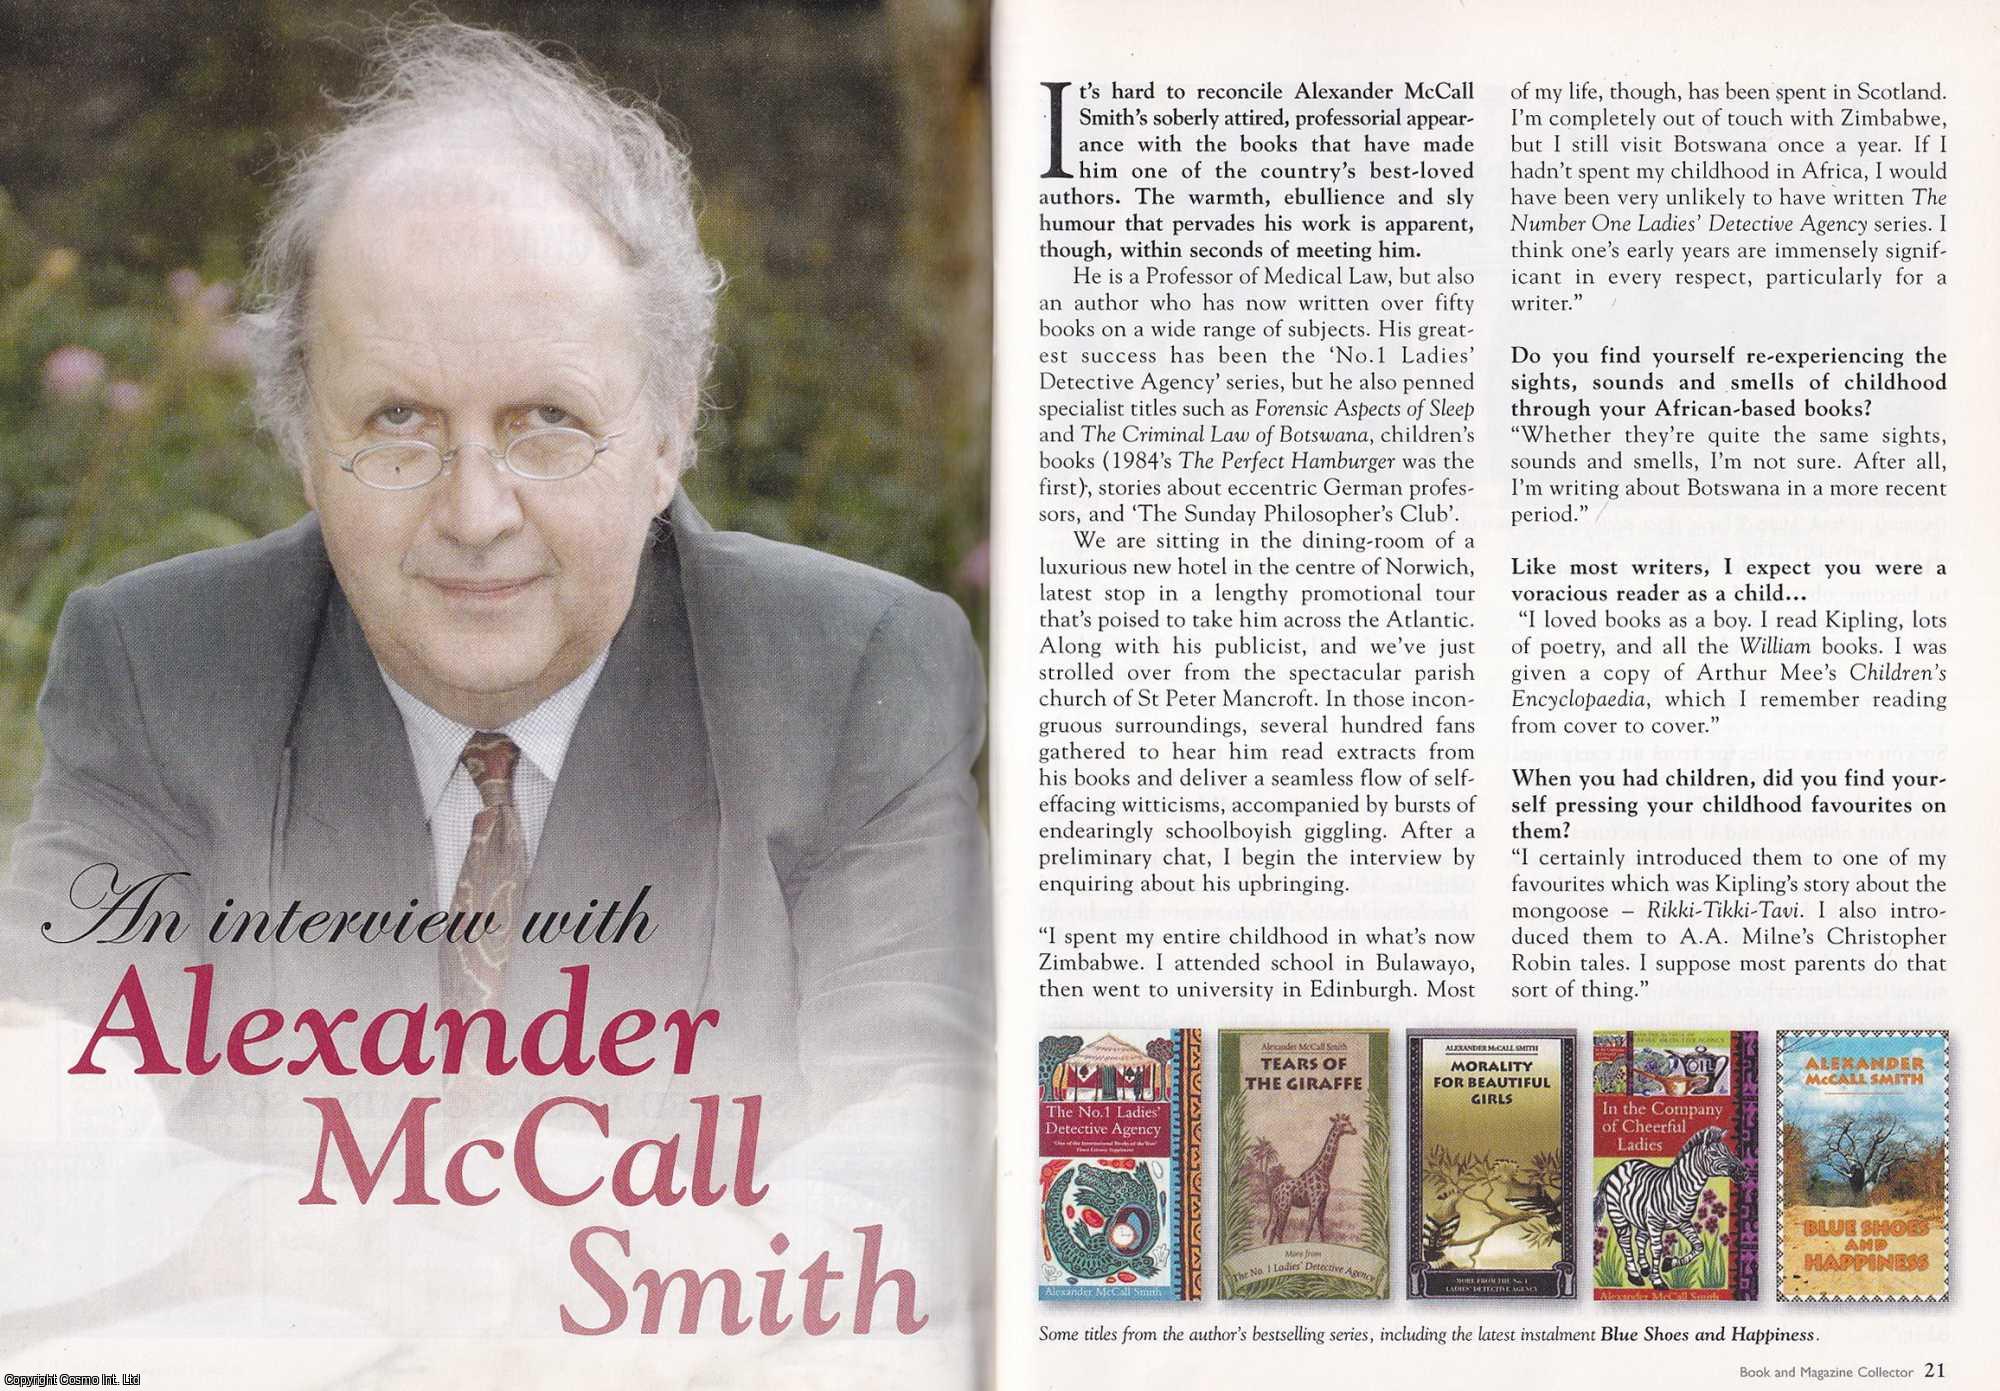 --- - An Interview with Alexander McCall Smith. This is an original article separated from an issue of The Book & Magazine Collector publication.